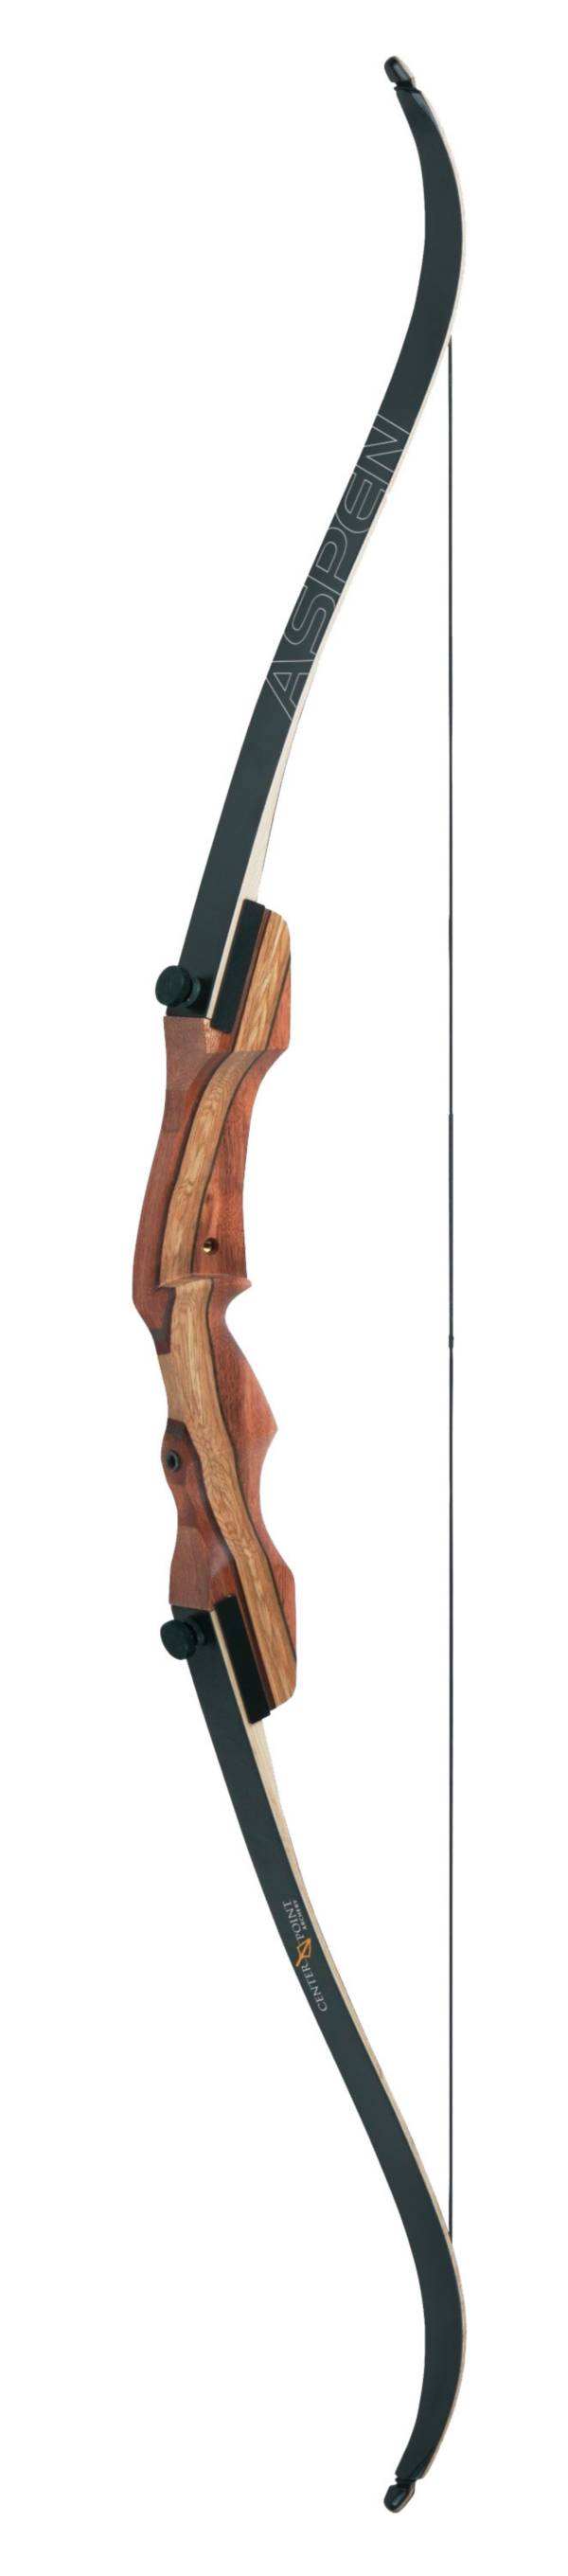 Centerpoint Aspen Takedown Recurve Bow product image